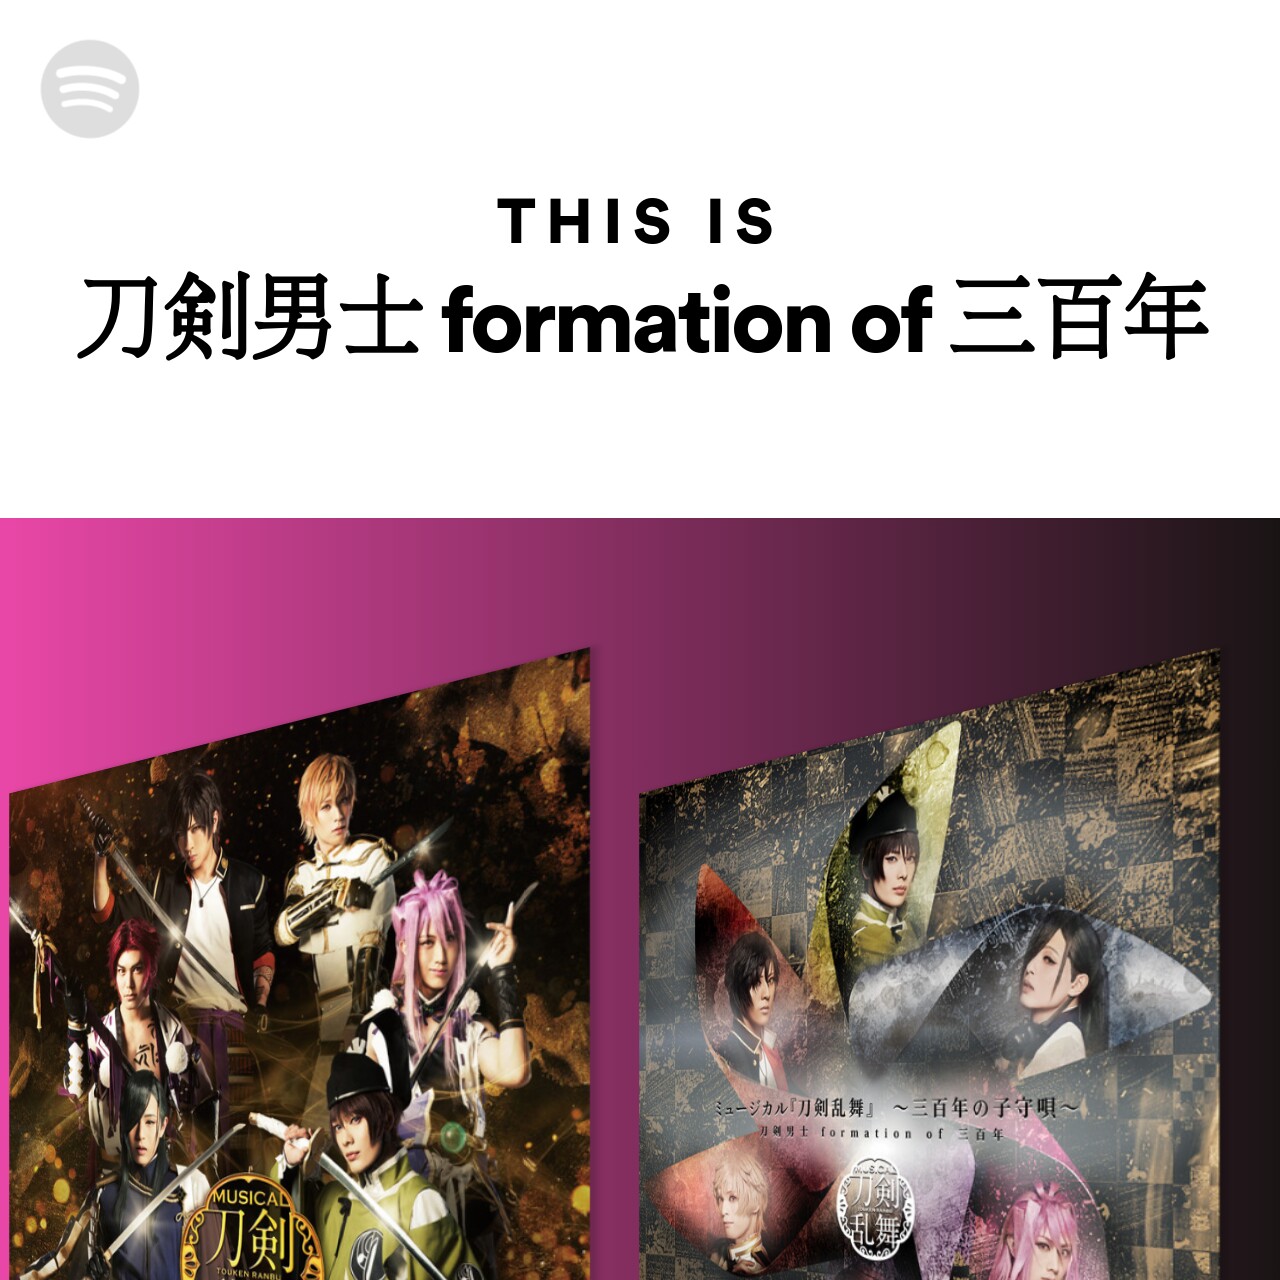 This Is 刀剣男士 formation of 三百年